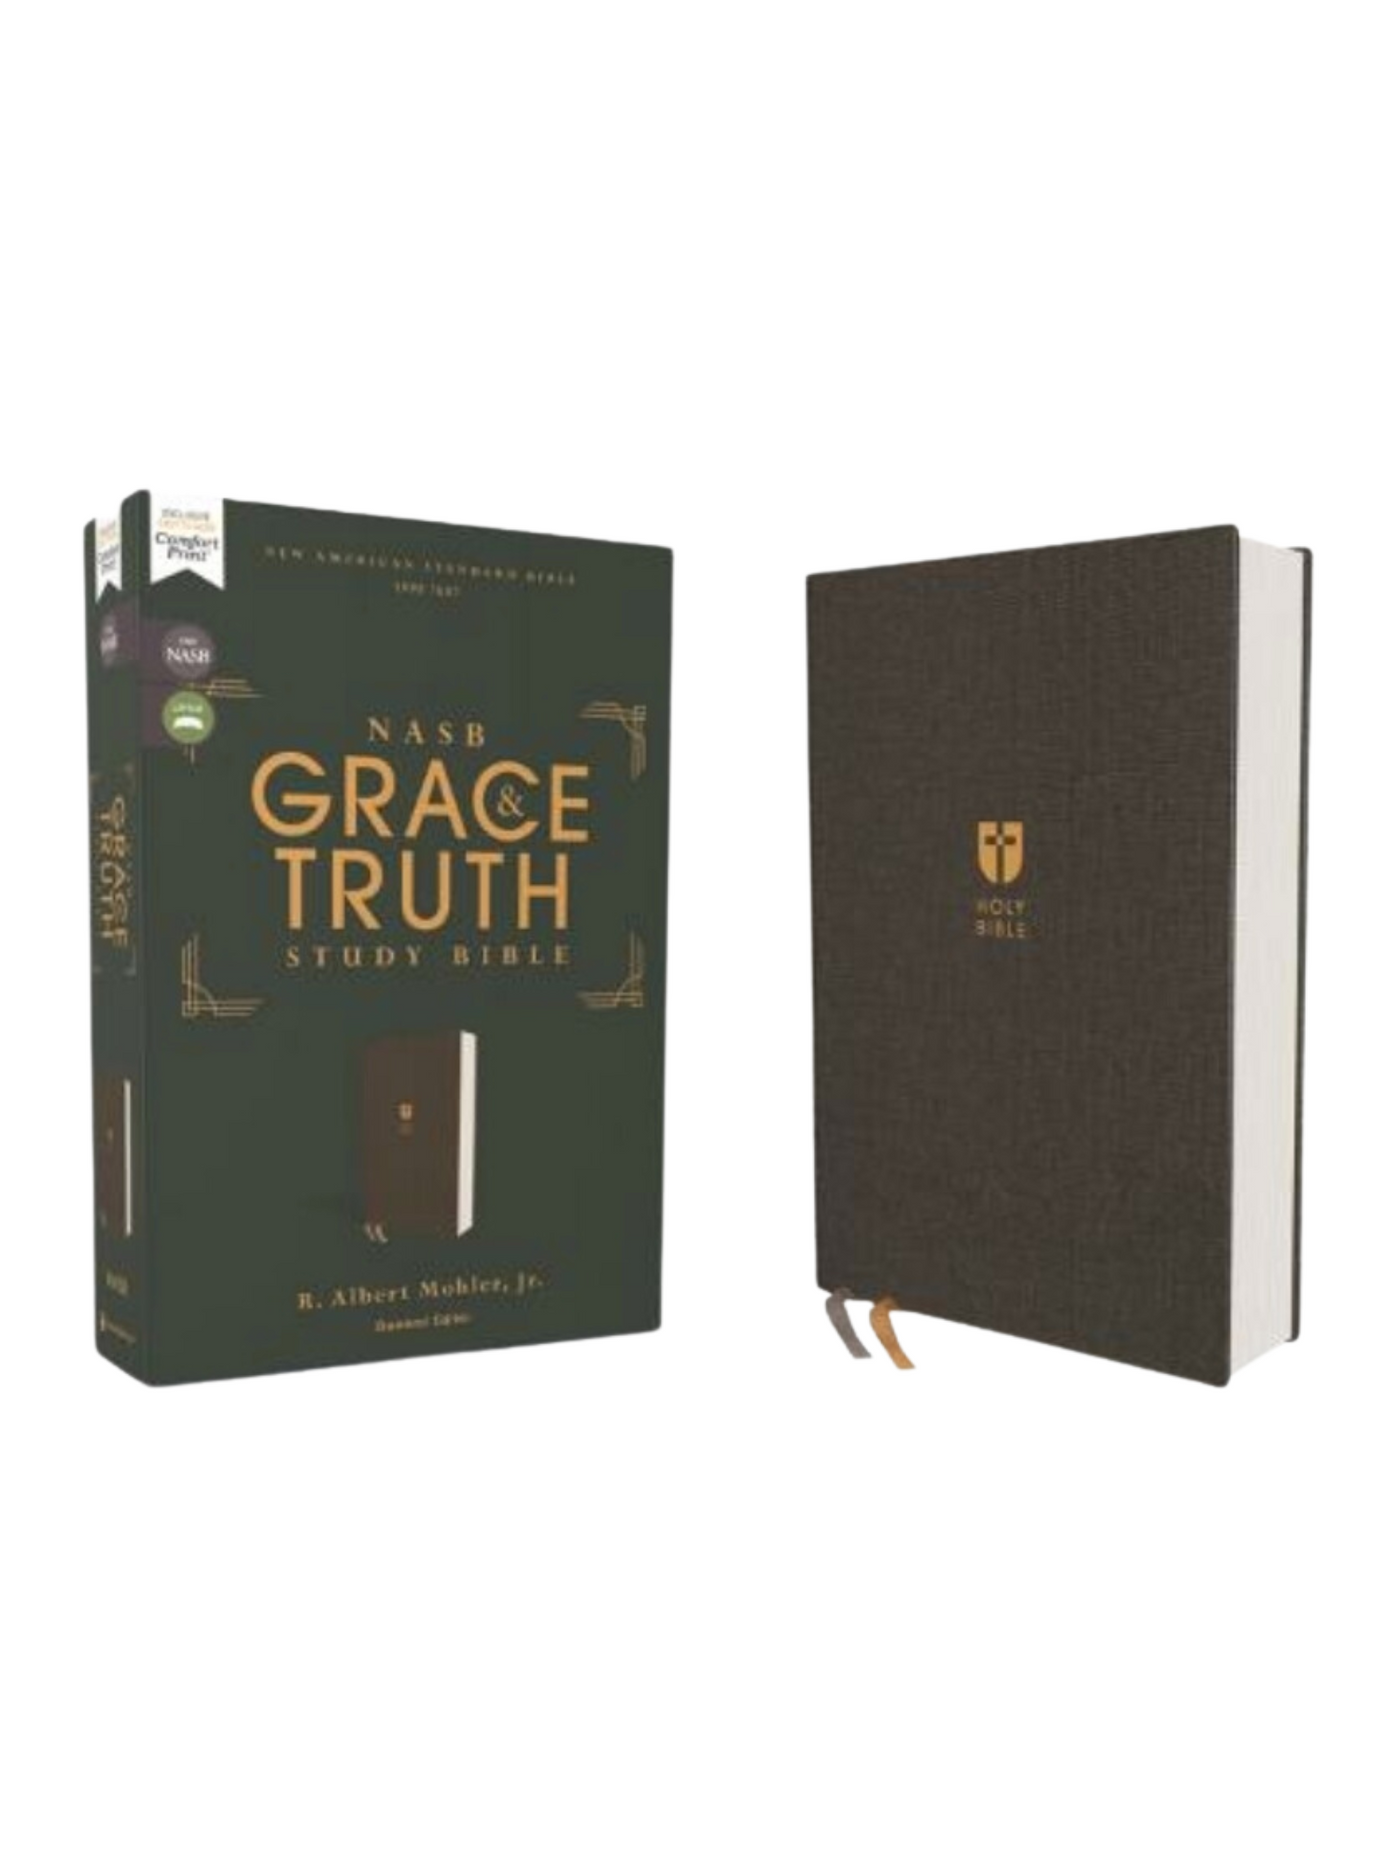 NASB Grace & Truth Study Bible front cover and Bible front.